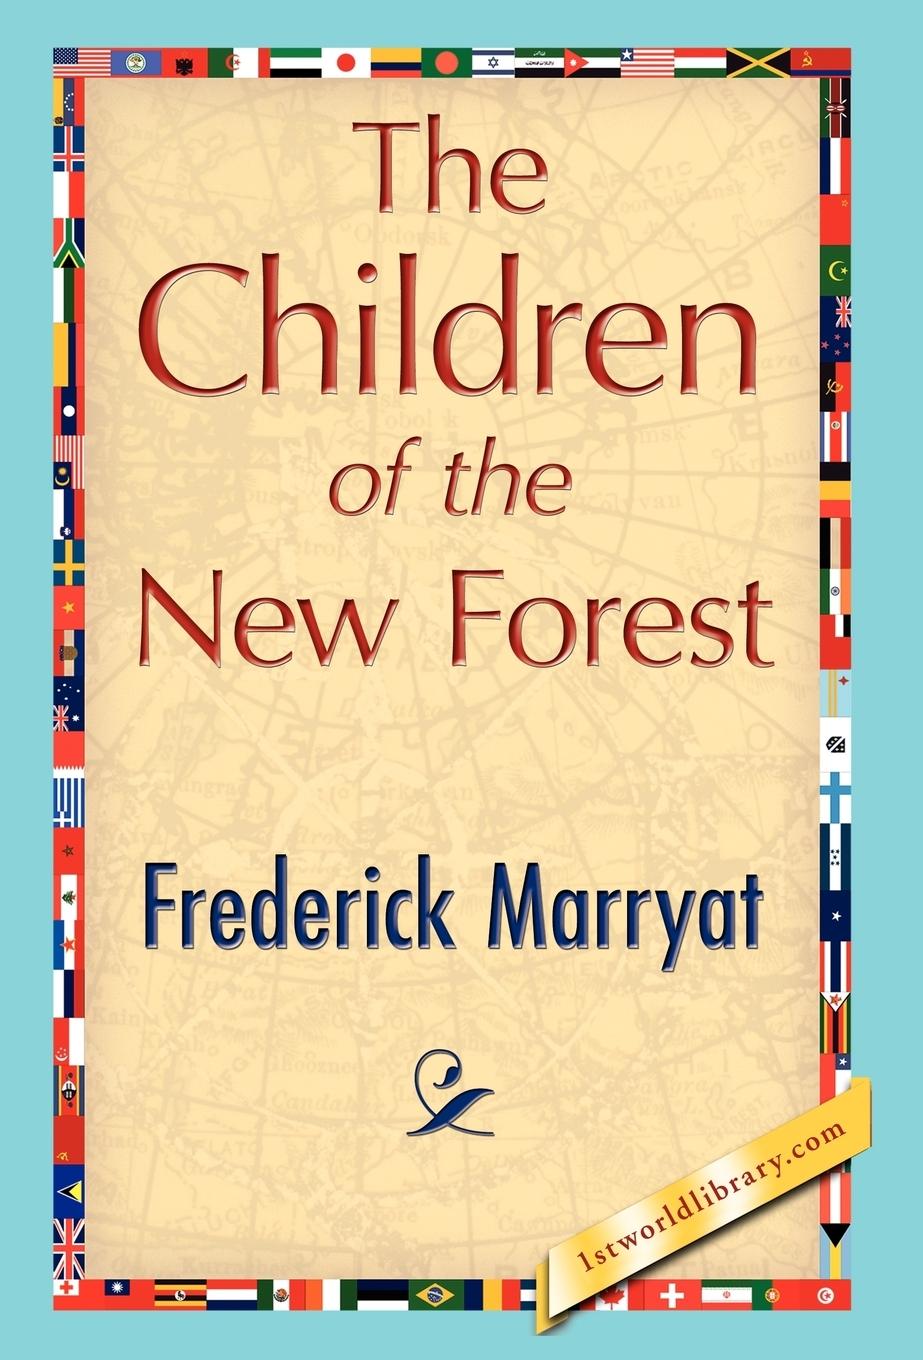 The Children of the New Forest - Frederick Marryat, Marryat Frederick Marryat